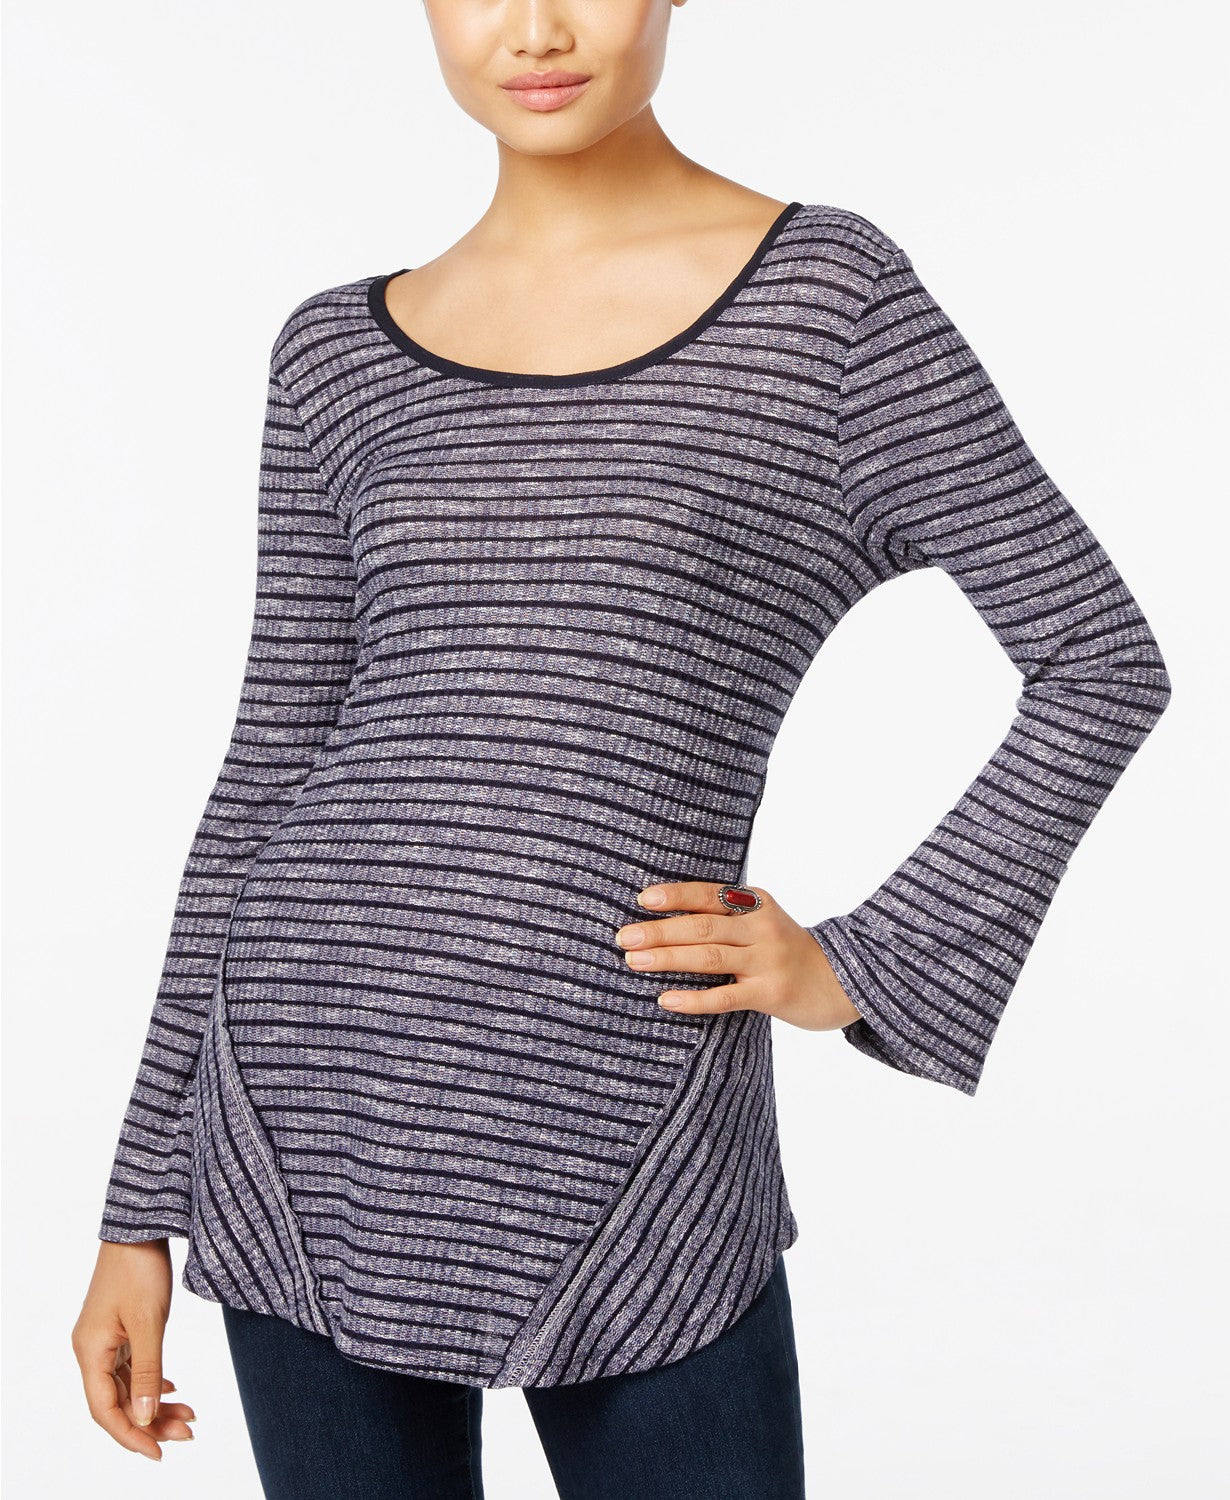 Style Co Petite Striped Bell-Sleeve Top Navy Stripe PM